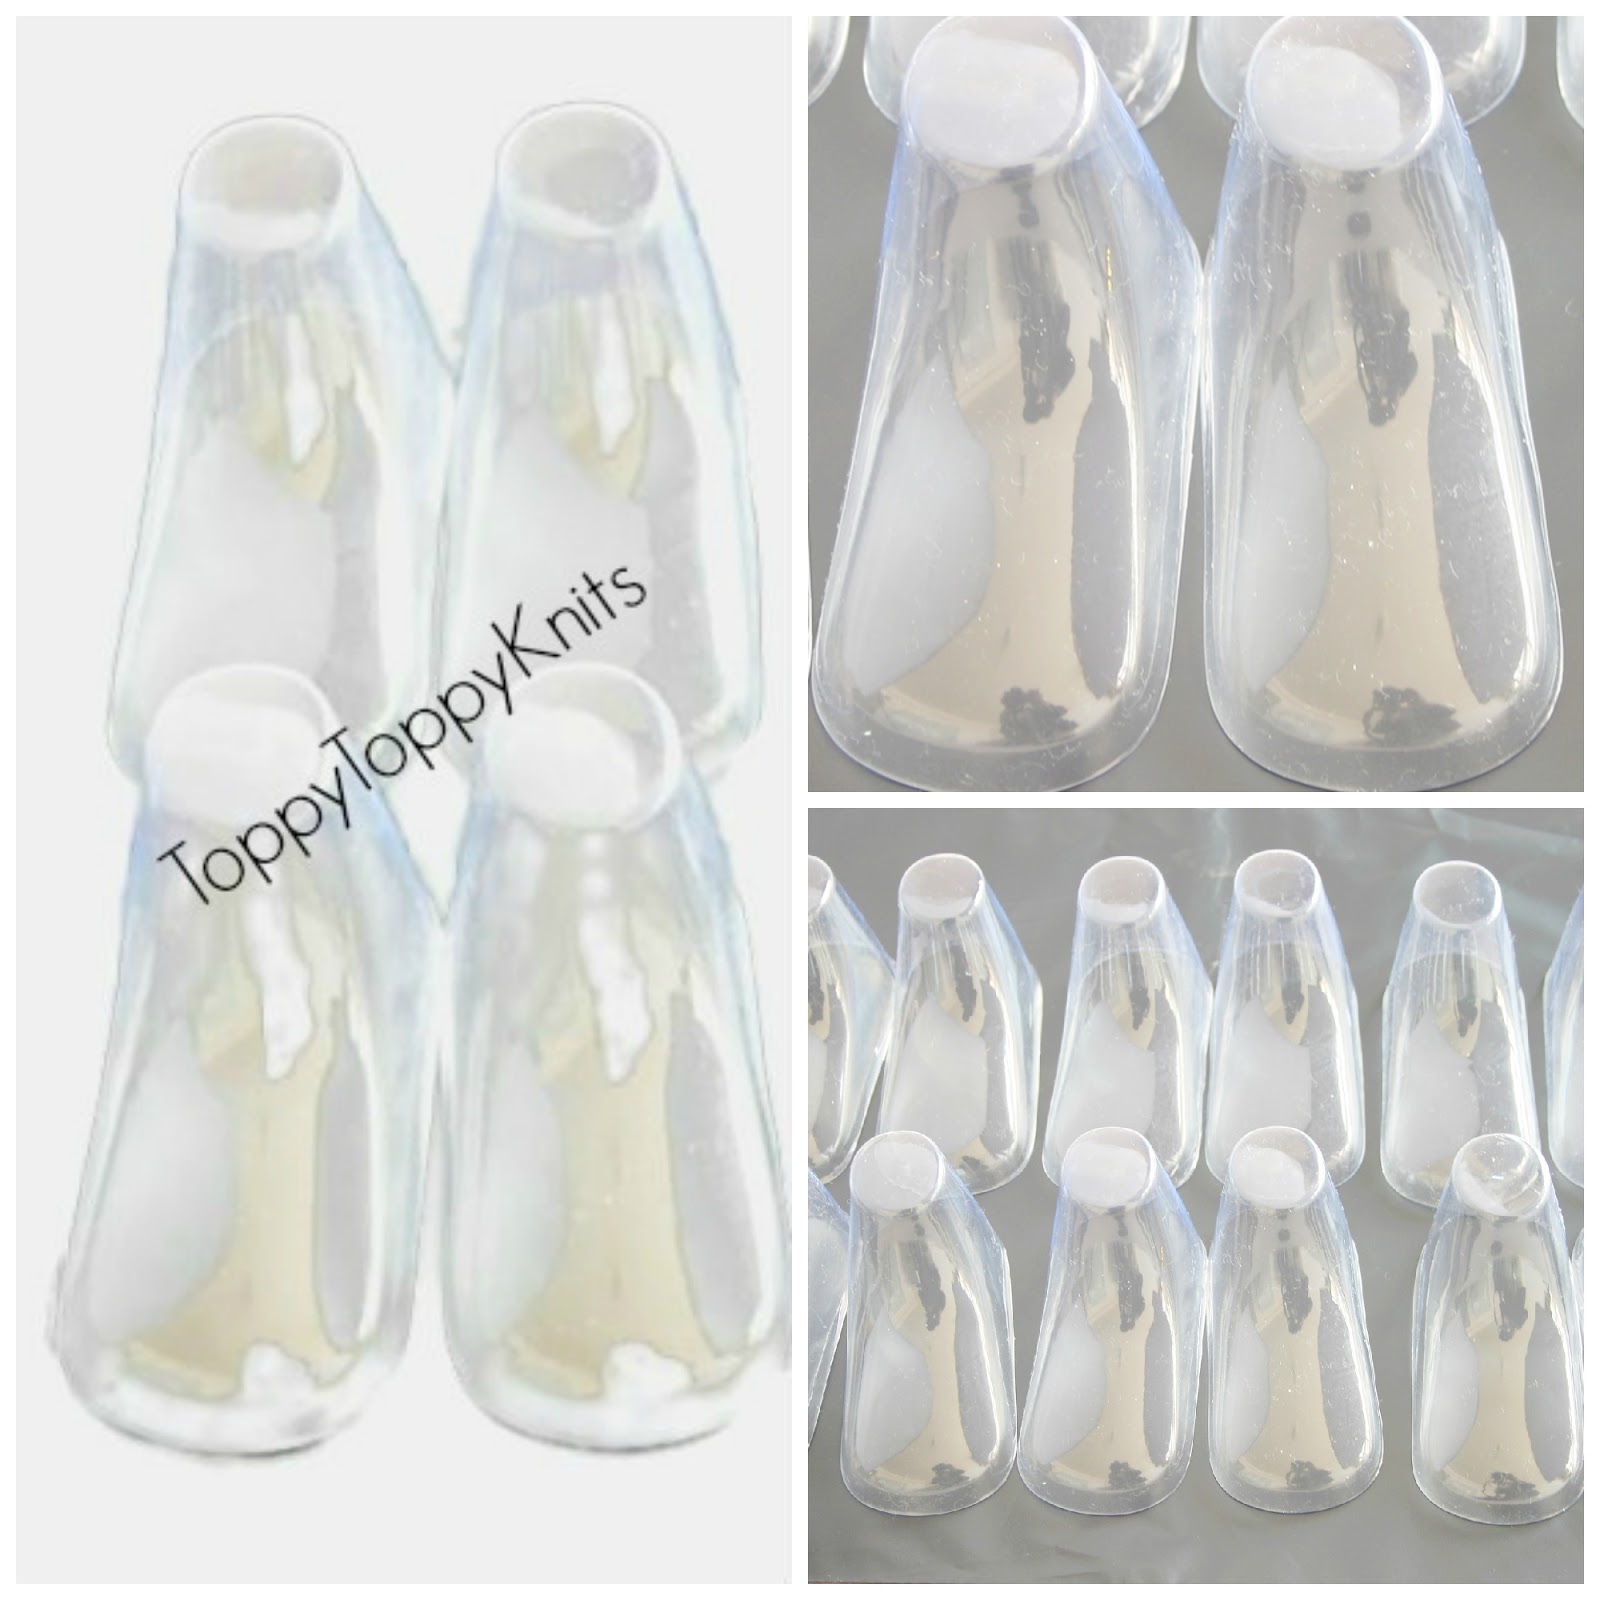 ToppyToppyKnits: Transparent forms for baby and adult shoes display